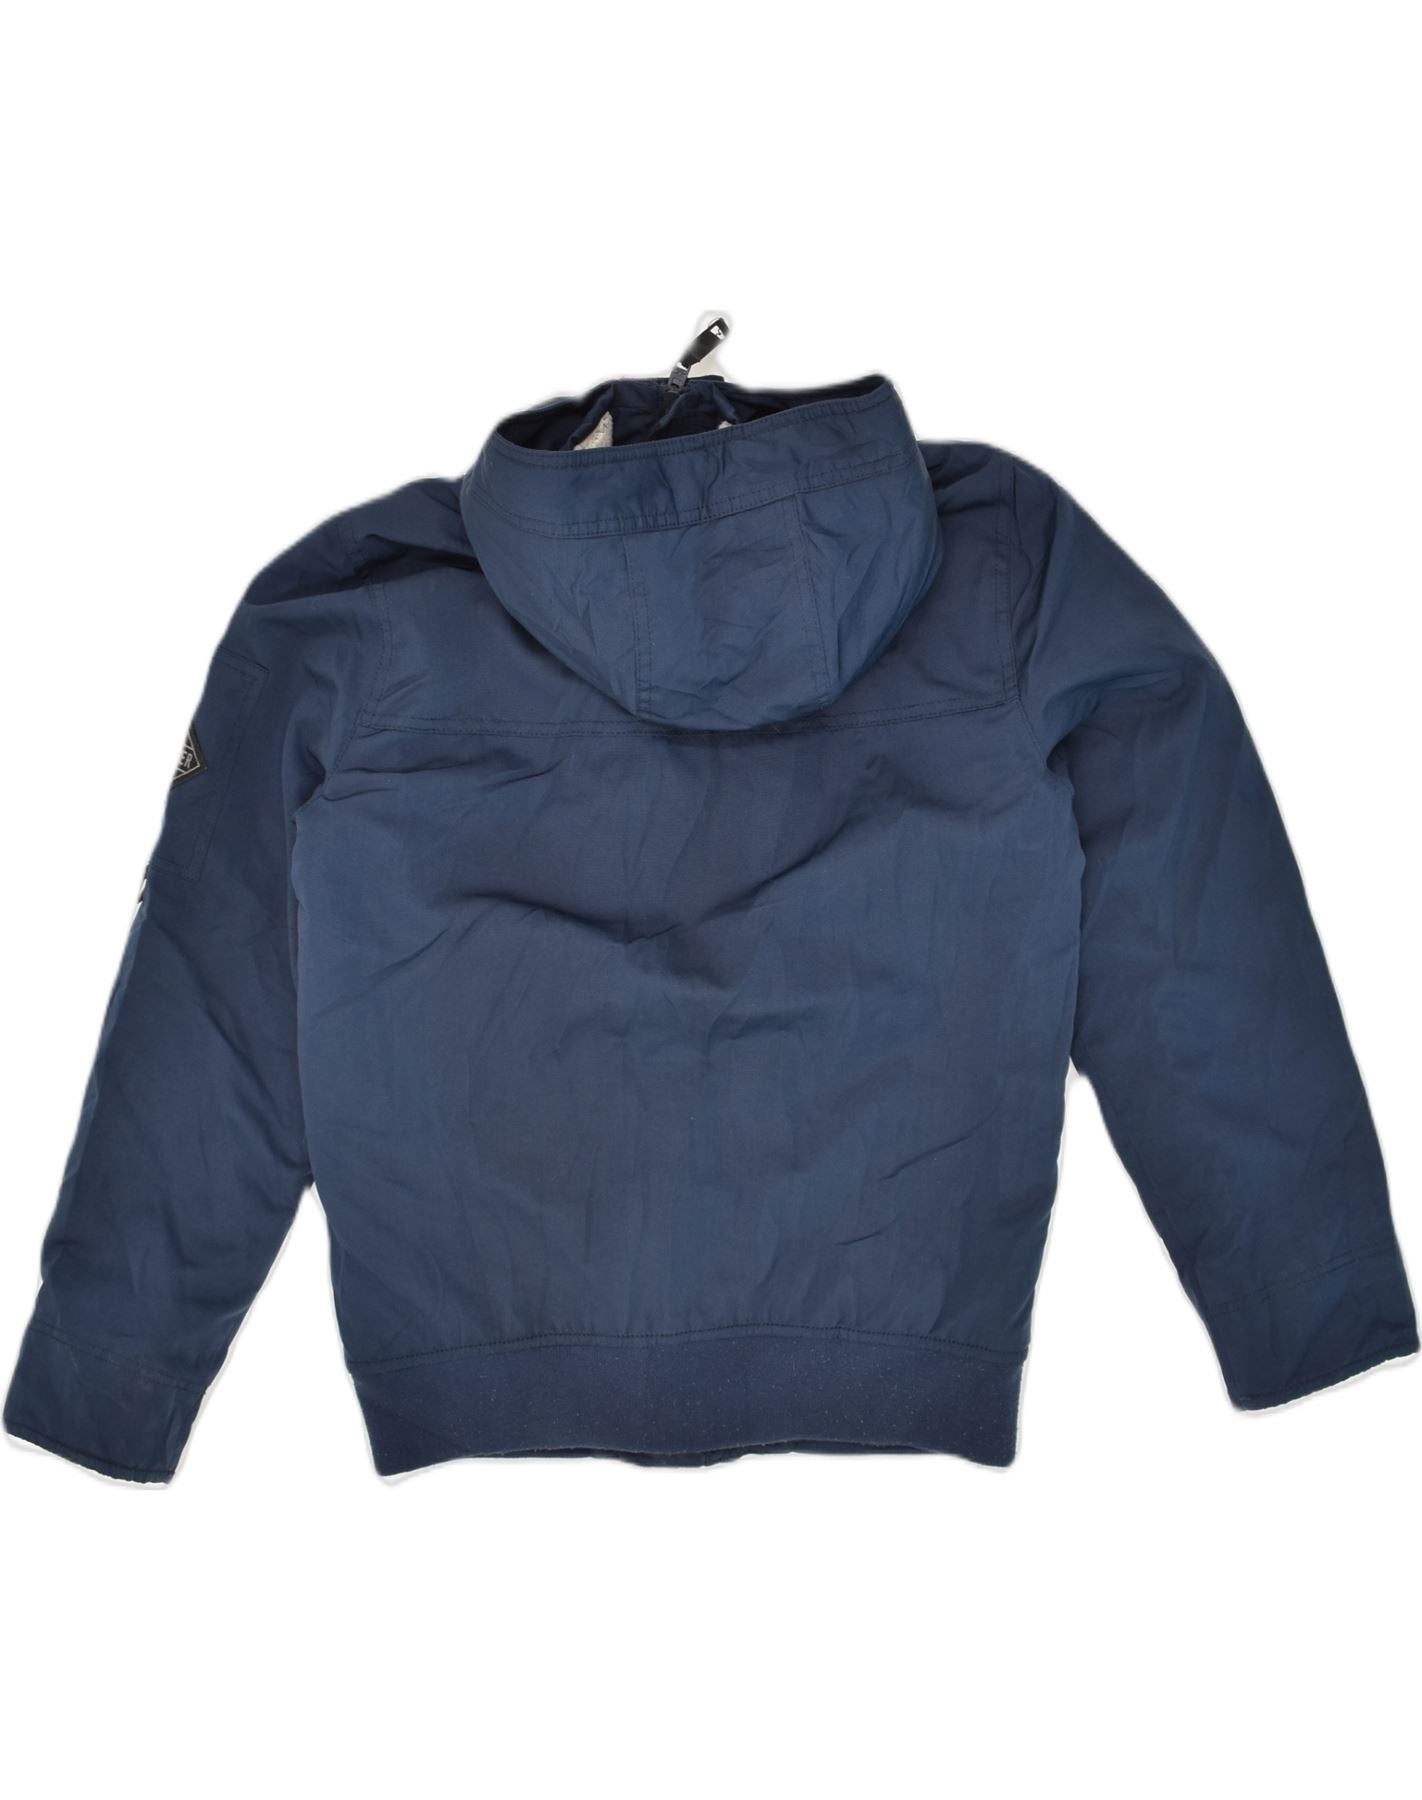 HOLLISTER Mens California Hooded Bomber Jacket UK 34 XS Navy Blue Cotton, Vintage & Second-Hand Clothing Online